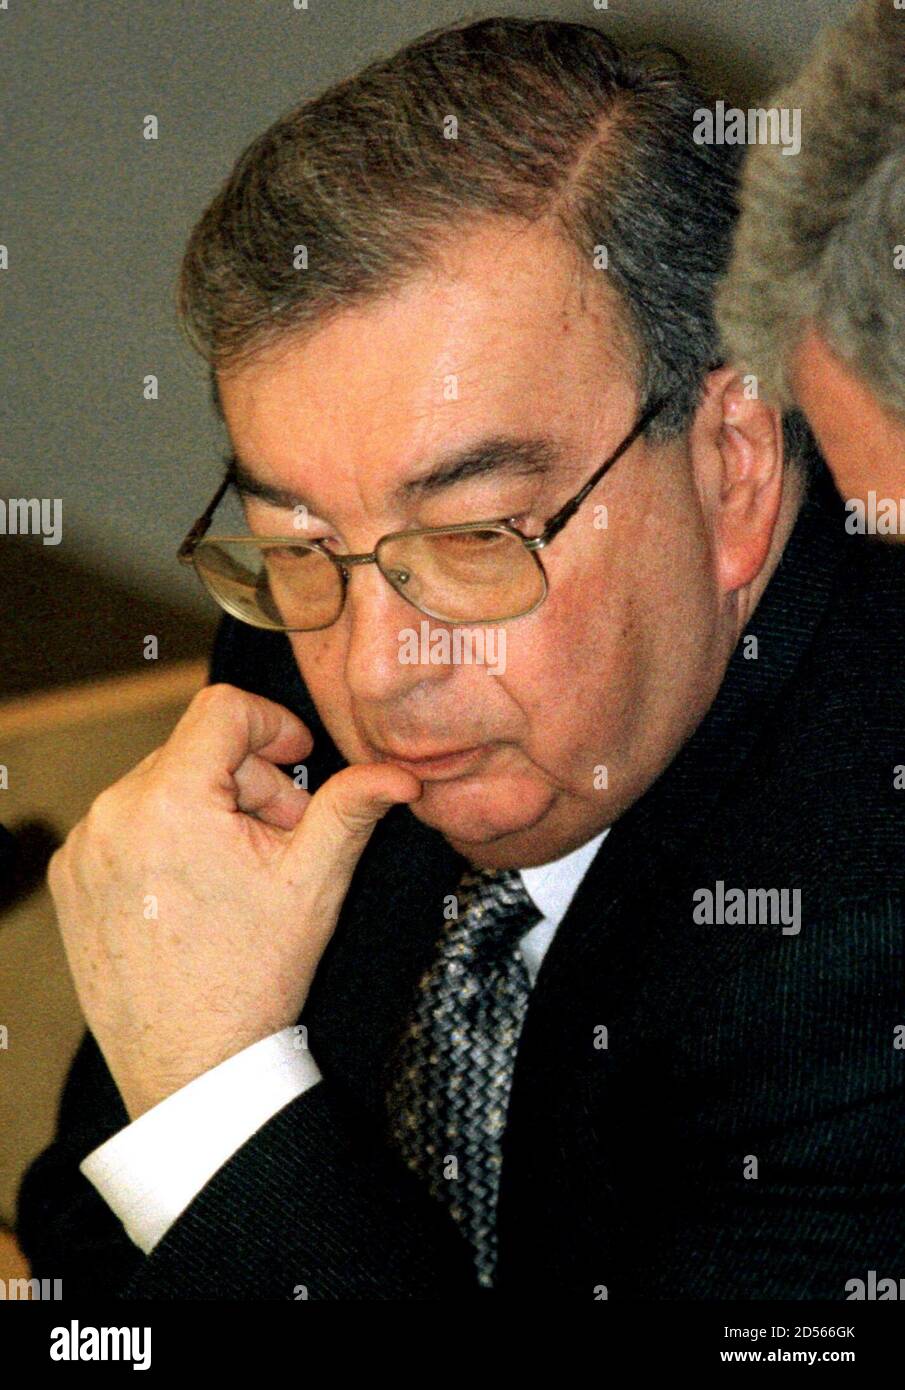 Russian Prime Minister Yevgeny Primakov listens during an emergency session of the lower house of parliament March 27. Foreign Minister Igor Ivanov said on Saturday NATO air strikes on Yugoslavia were a dark chapter in history but Russia would not respond by taking any actions that would risk dragging it into war.  CVI Stock Photo